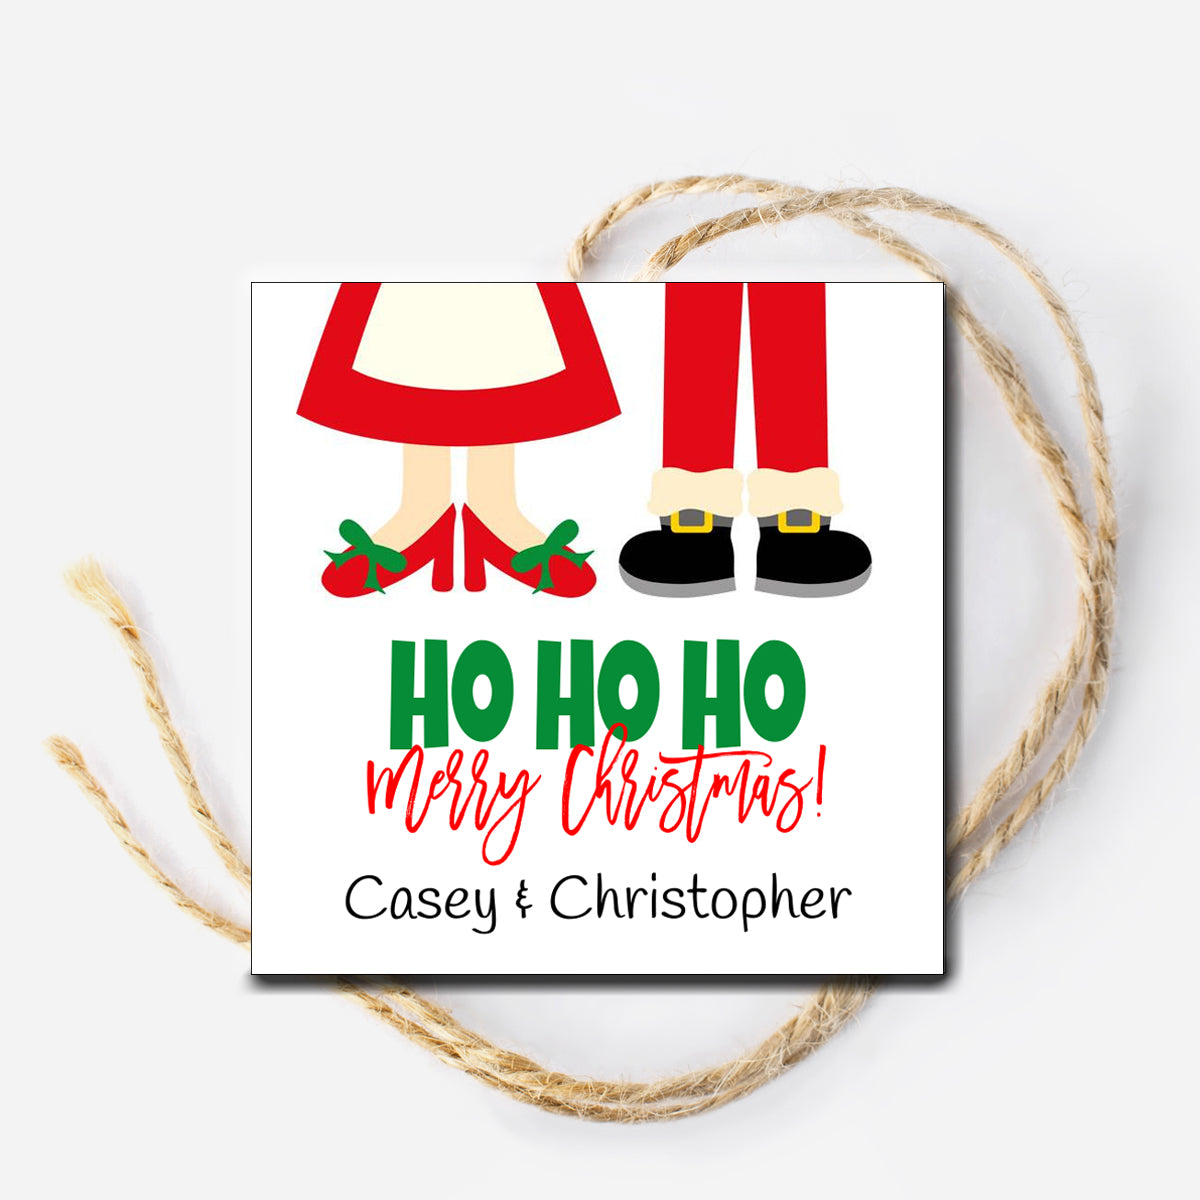 Mr. and Mrs. Claus Gift Tag